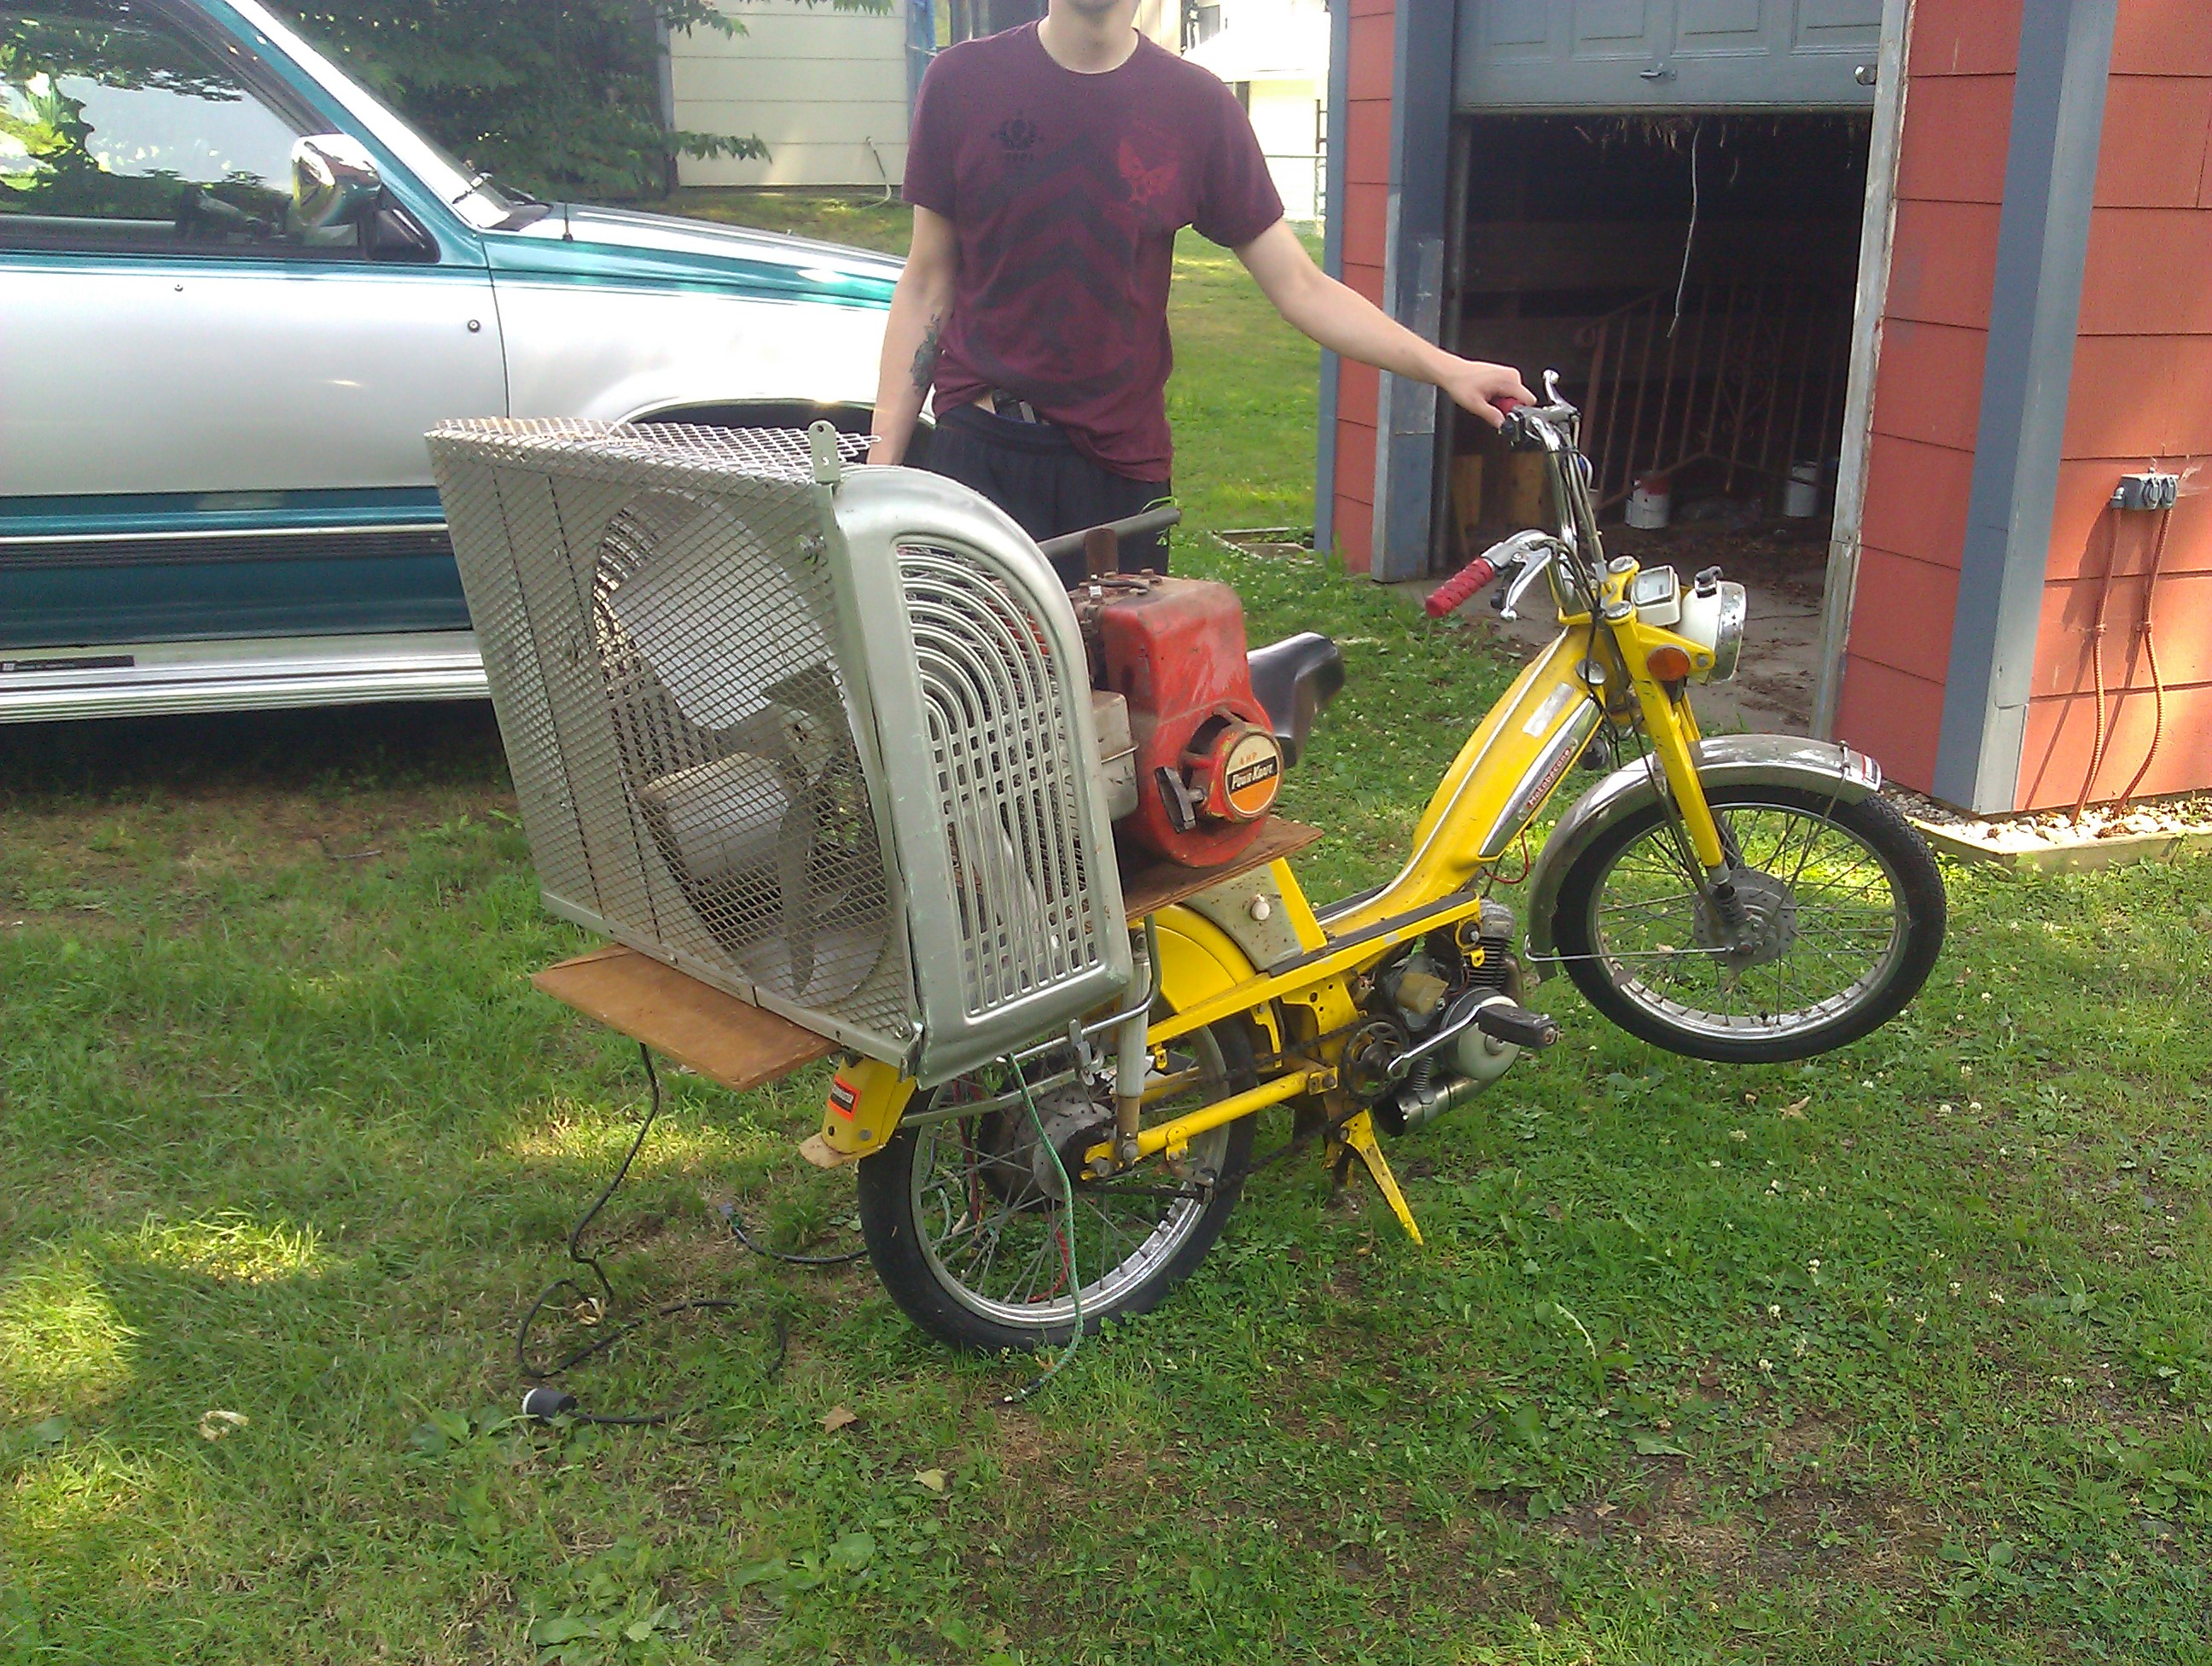 My friend and I have created an Eco-friendly Hybrid motorcycle. As you can see it is very practical.

1. Find a moped with a broken engine
2. Find a generator
3. Find a fan
4. Bolt it together
5. Pickup ladies